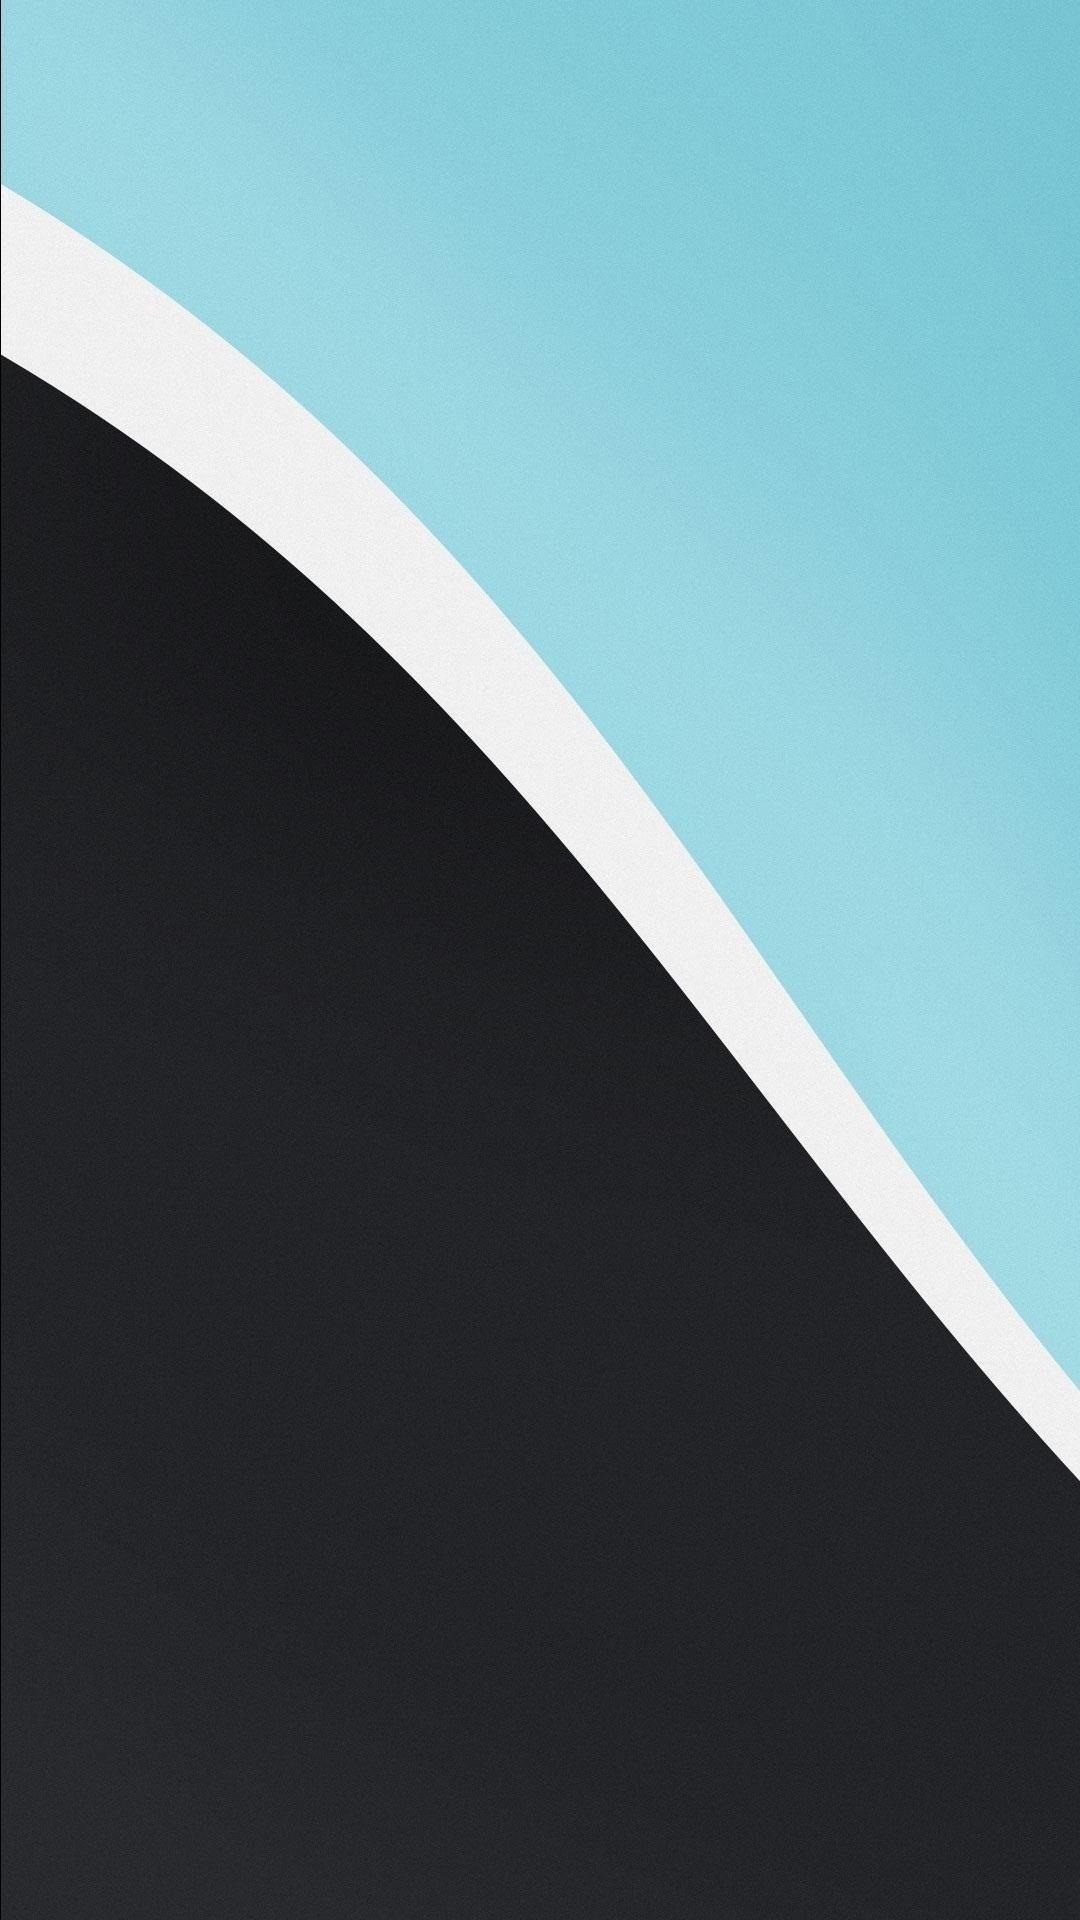 Get The Htc One S New Wallpapers On Any Of Your Android - Mobile Blue And White - HD Wallpaper 